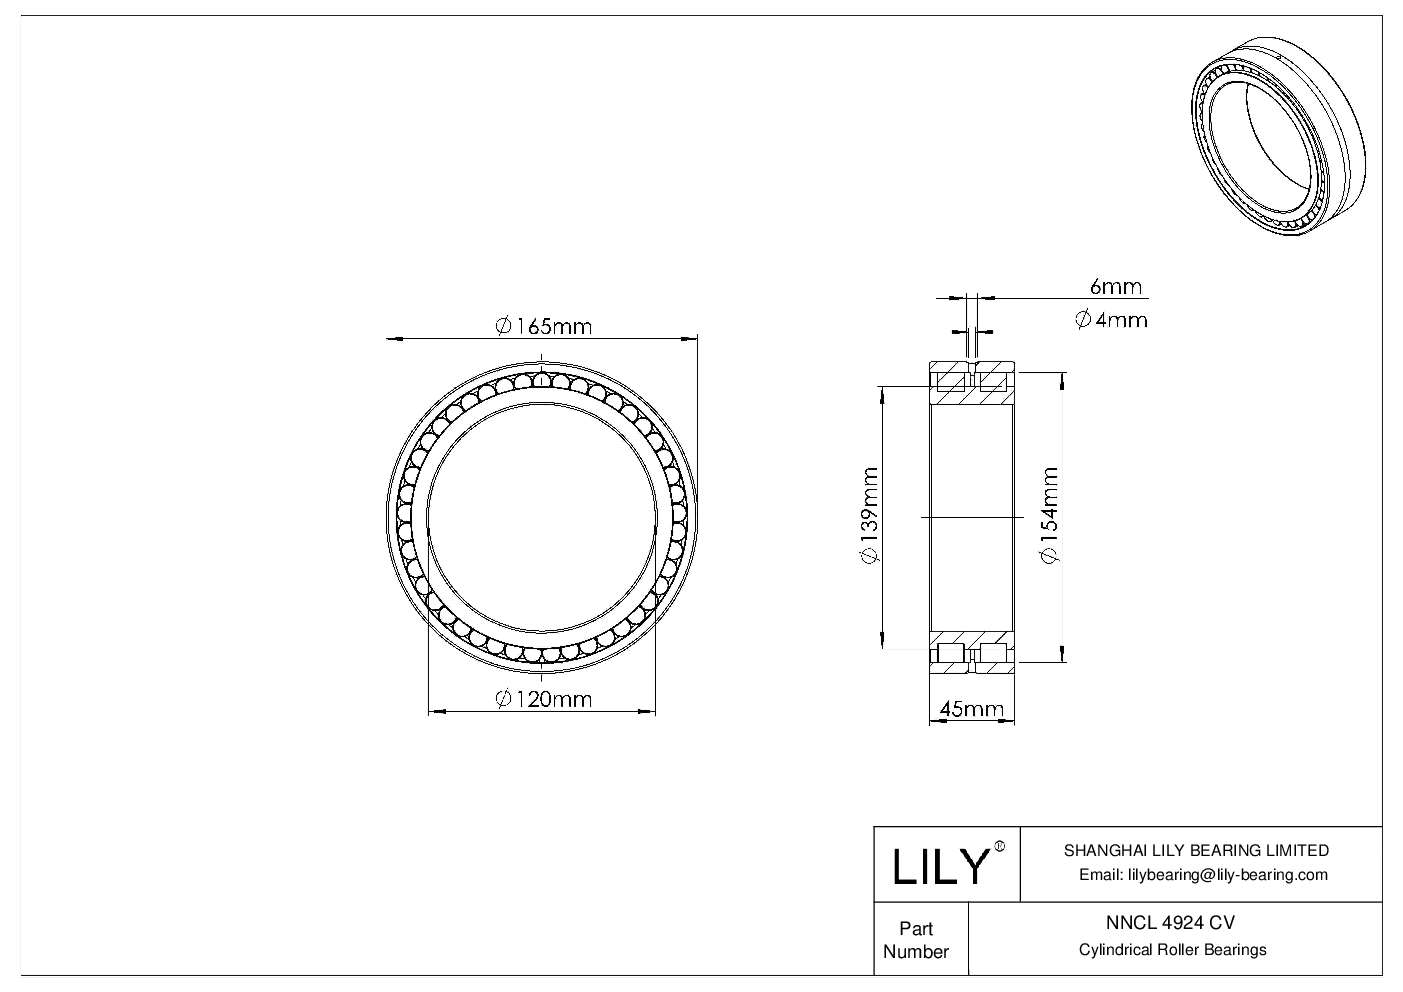 NNCL 4924 CV Double Row Full Complement Cylindrical Roller Bearings cad drawing